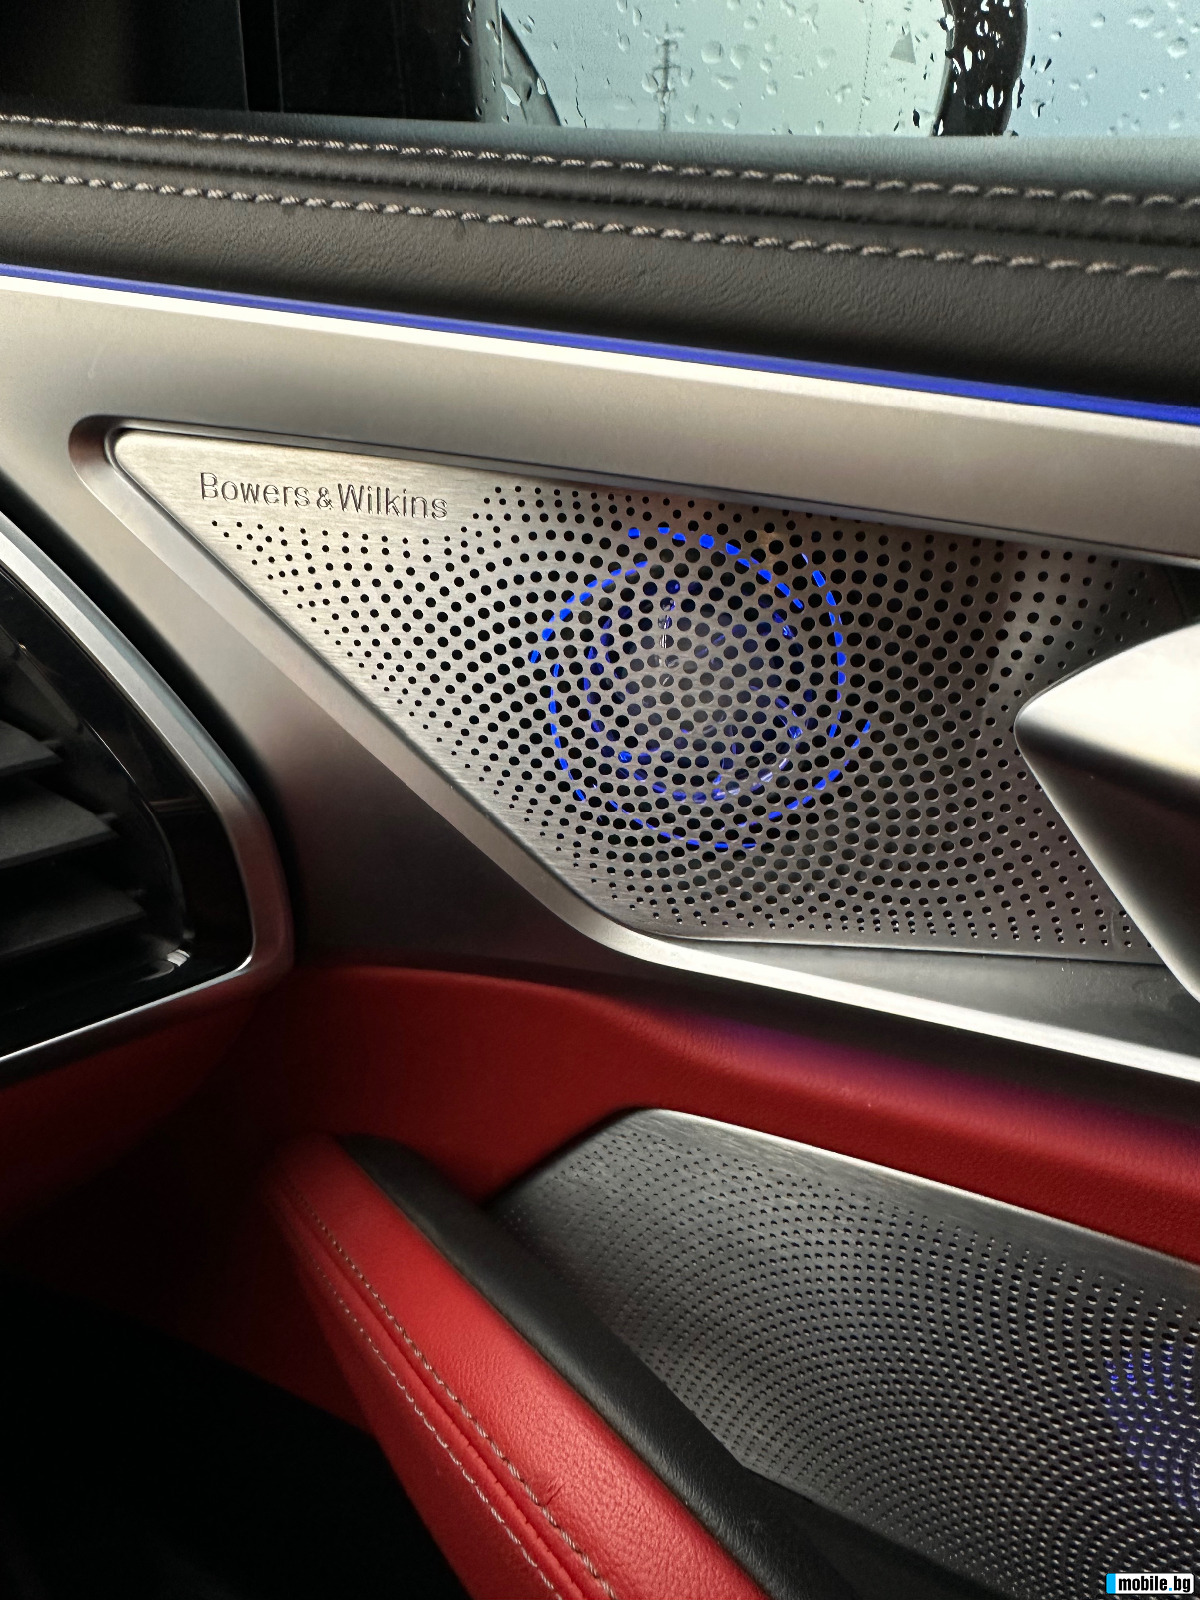 BMW 850 i xDrive BOWERS&WILKINS/ LASER / PANORAMA/ Head up | Mobile.bg   16